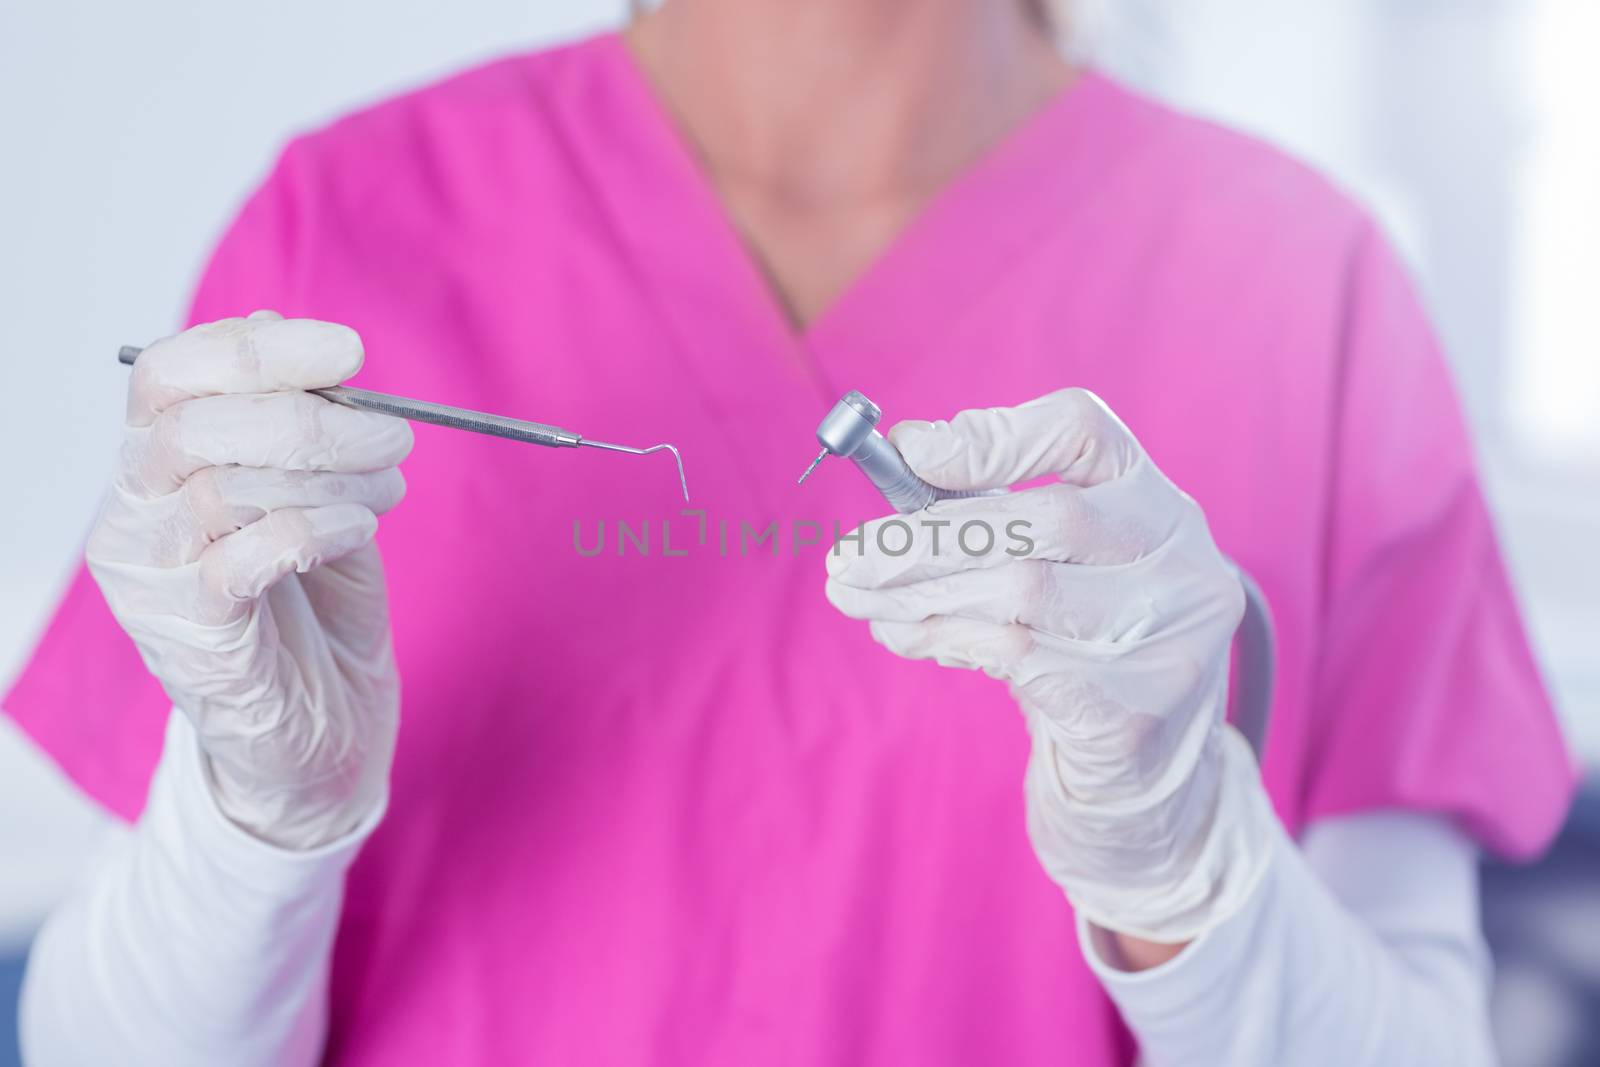 Dentist in pink scrubs holding tool at the dental clinic